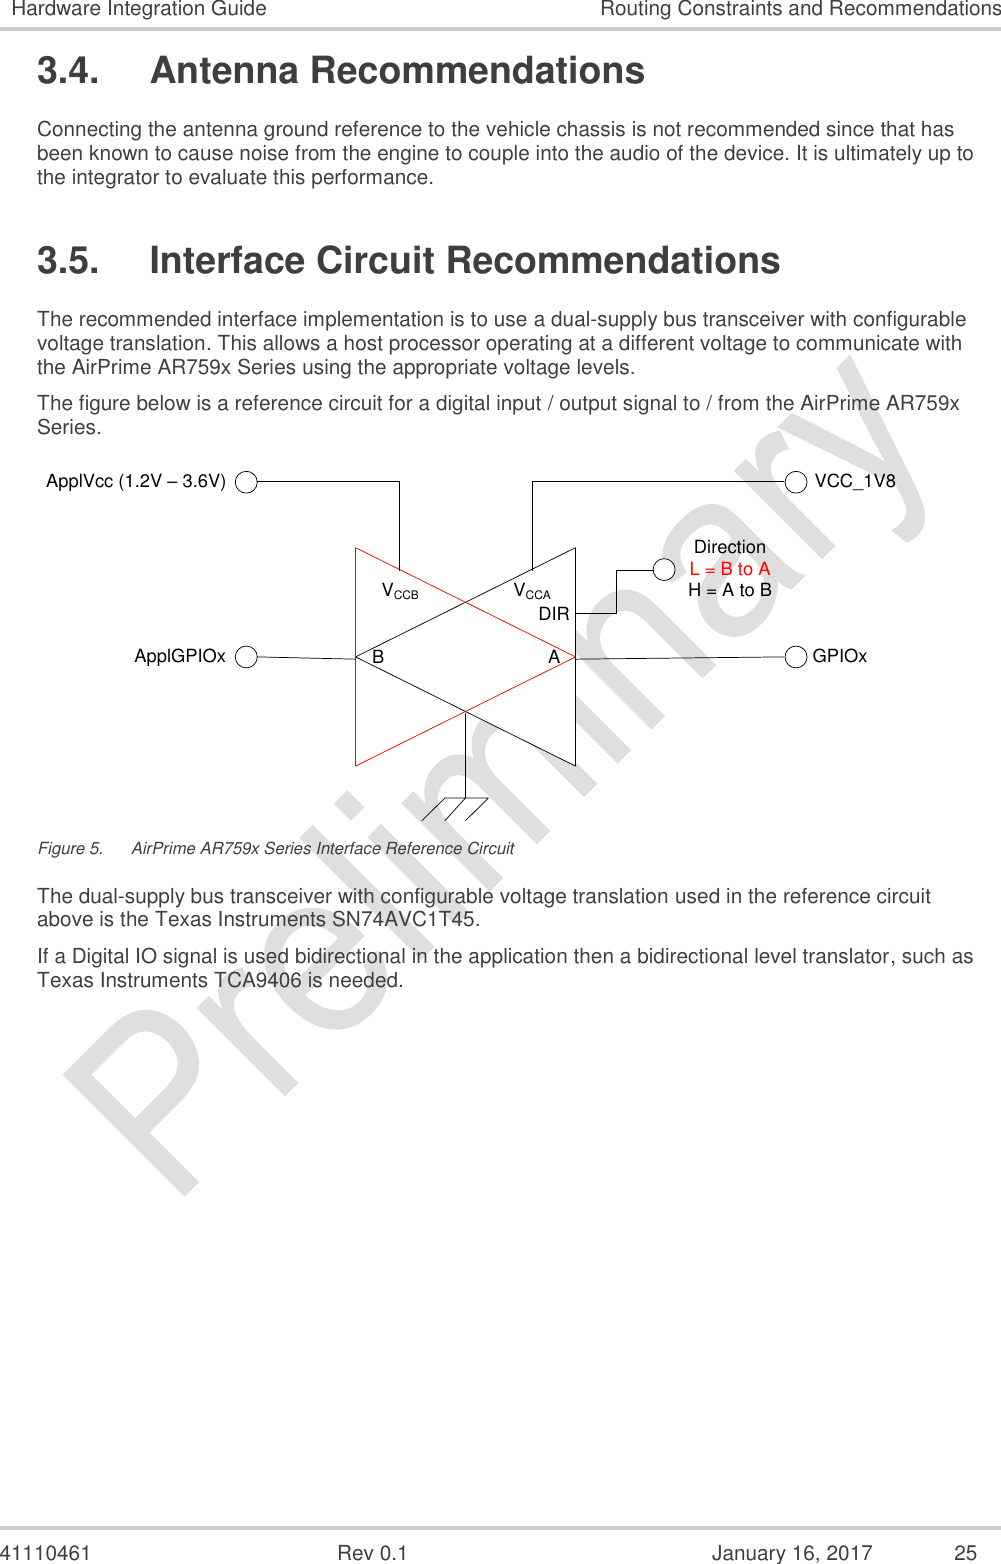  41110461  Rev 0.1  January 16, 2017  25 Hardware Integration Guide Routing Constraints and Recommendations 3.4.  Antenna Recommendations Connecting the antenna ground reference to the vehicle chassis is not recommended since that has been known to cause noise from the engine to couple into the audio of the device. It is ultimately up to the integrator to evaluate this performance. 3.5.  Interface Circuit Recommendations The recommended interface implementation is to use a dual-supply bus transceiver with configurable voltage translation. This allows a host processor operating at a different voltage to communicate with the AirPrime AR759x Series using the appropriate voltage levels. The figure below is a reference circuit for a digital input / output signal to / from the AirPrime AR759x Series. VCCAVCCB DIRAB GPIOxVCC_1V8ApplVcc (1.2V – 3.6V)ApplGPIOxDirectionL = B to AH = A to B Figure 5.  AirPrime AR759x Series Interface Reference Circuit The dual-supply bus transceiver with configurable voltage translation used in the reference circuit above is the Texas Instruments SN74AVC1T45. If a Digital IO signal is used bidirectional in the application then a bidirectional level translator, such as Texas Instruments TCA9406 is needed. 